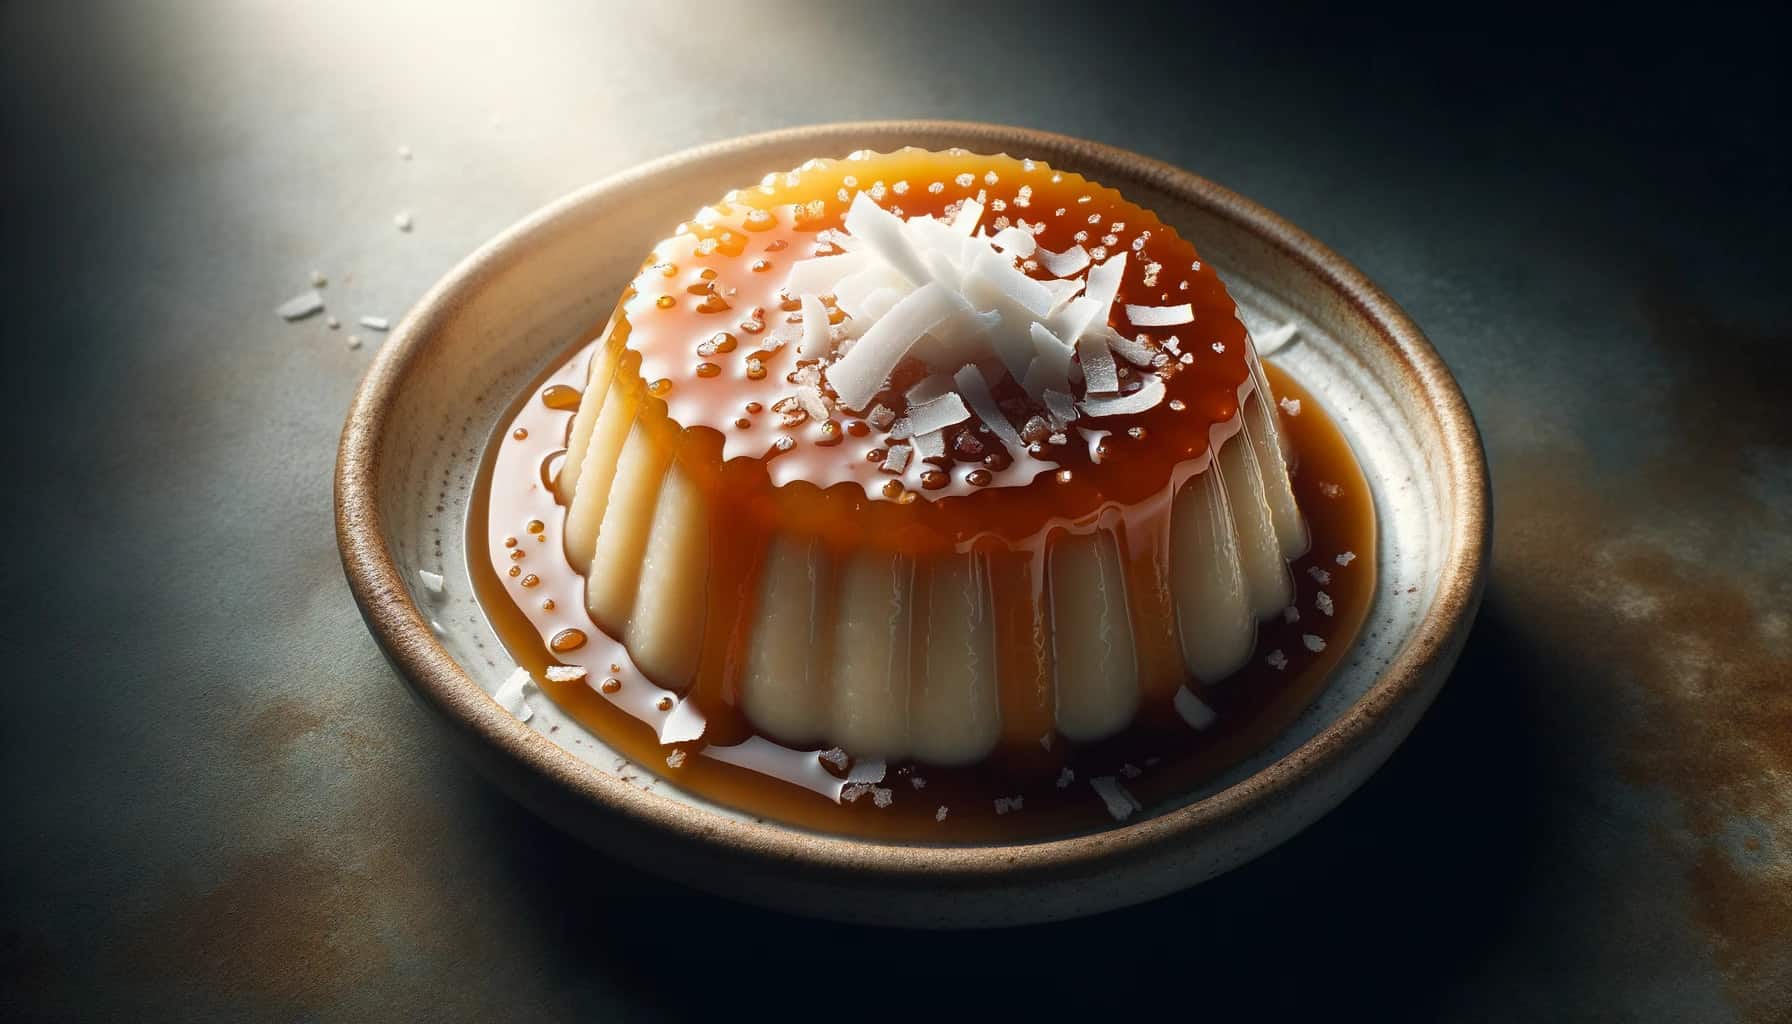 Manjar branco (coconut and cornstarch pudding) presented on a ceramic plate. The pudding is garnished with a few coconut shavings and a drizzle of caramel sauce.